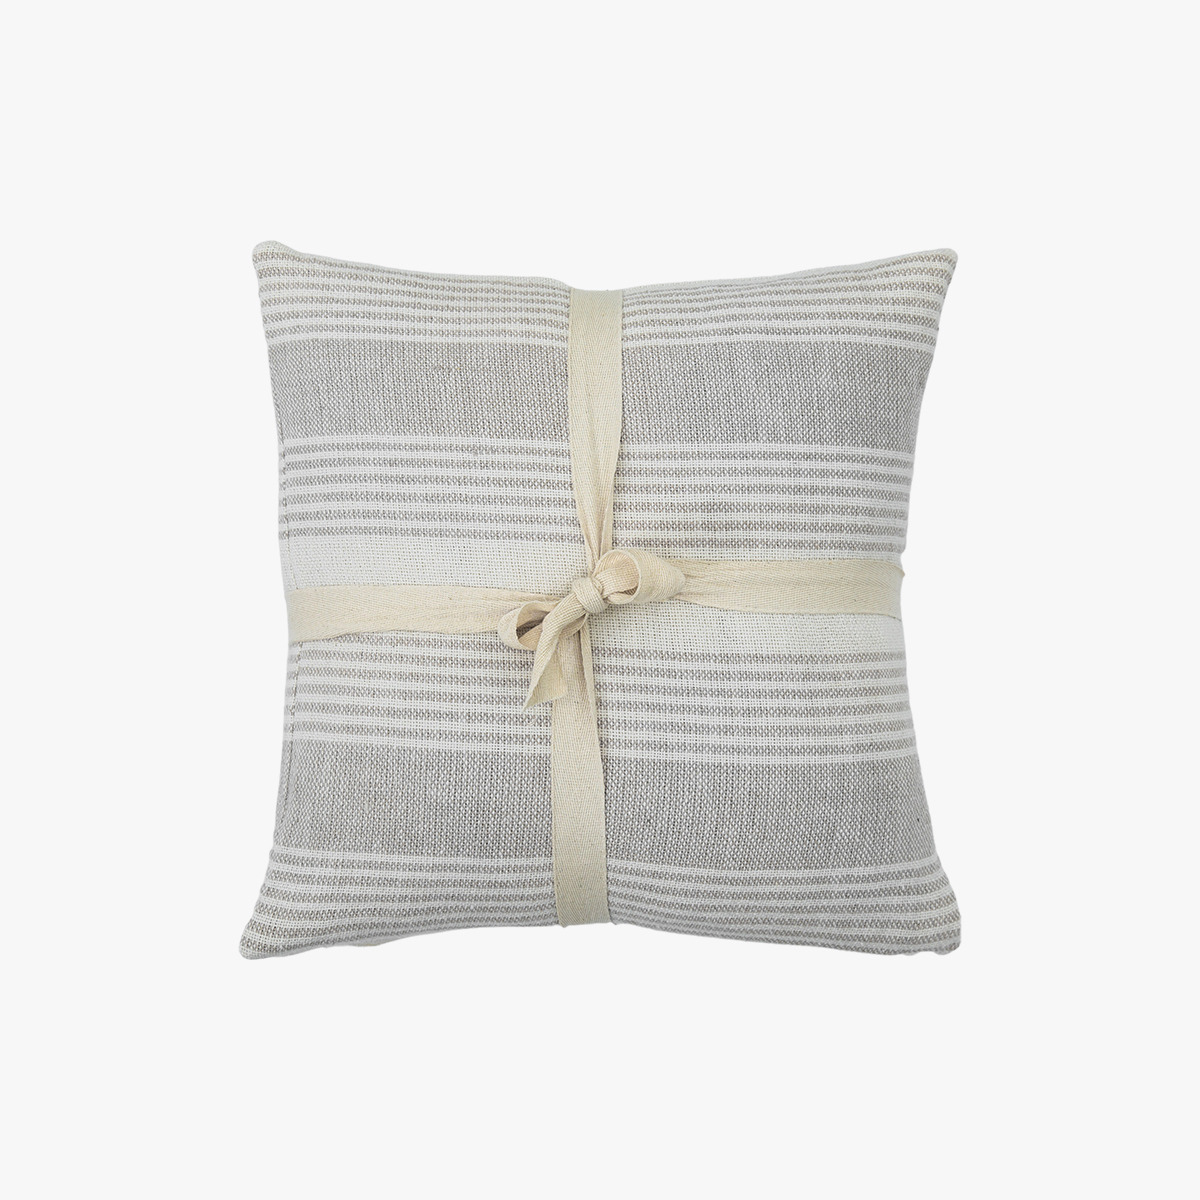 Nuzzler Stripe Cushion in Grey Set of Two